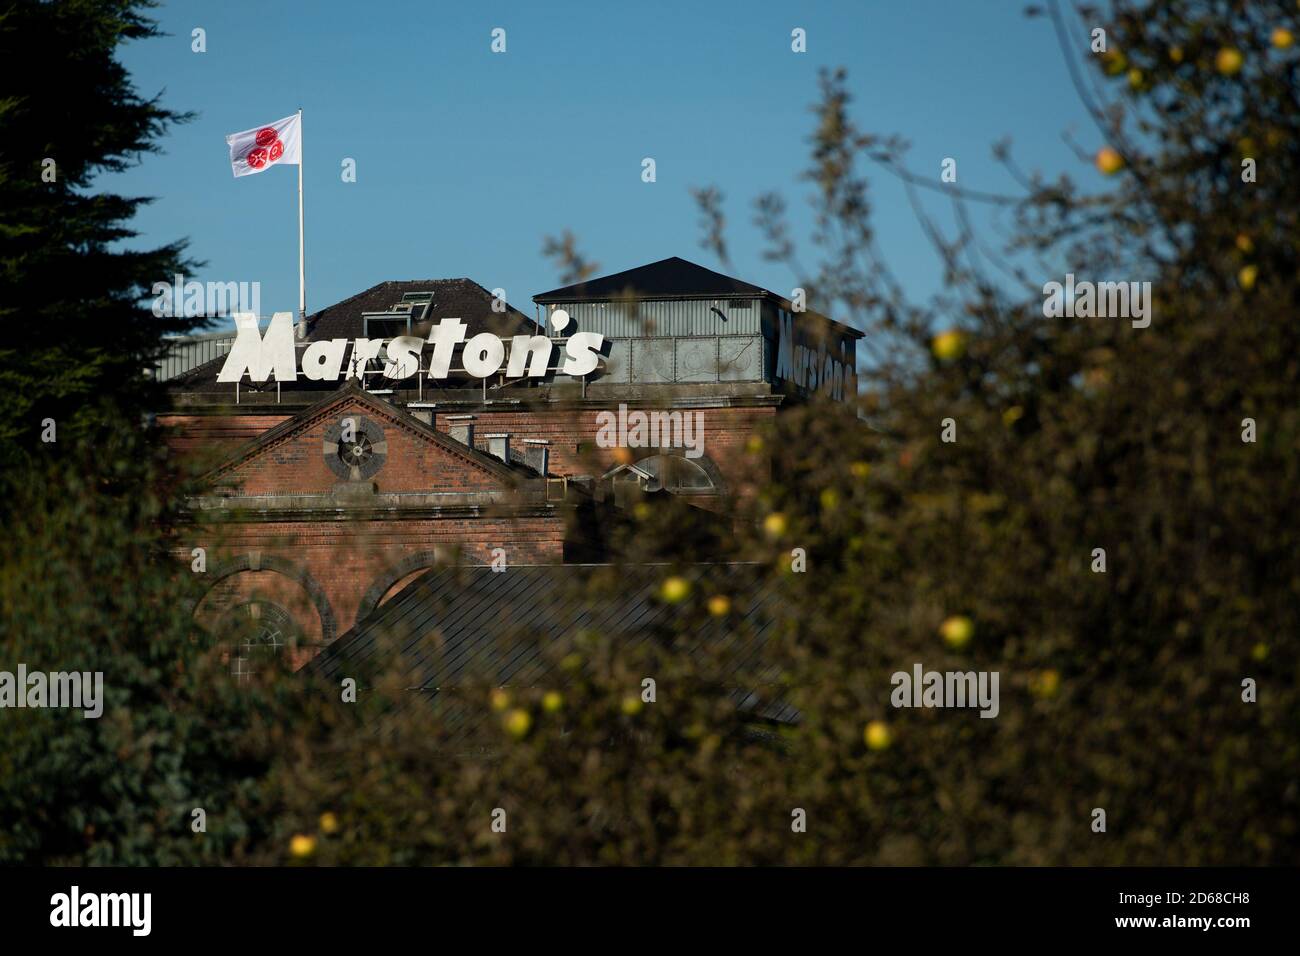 Marston's Brewery in Burton upon Trent, Staffordshire. More than 2,000 jobs are being axed at the pub chain as curfews and new coronavirus restrictions have hammered trade. Stock Photo